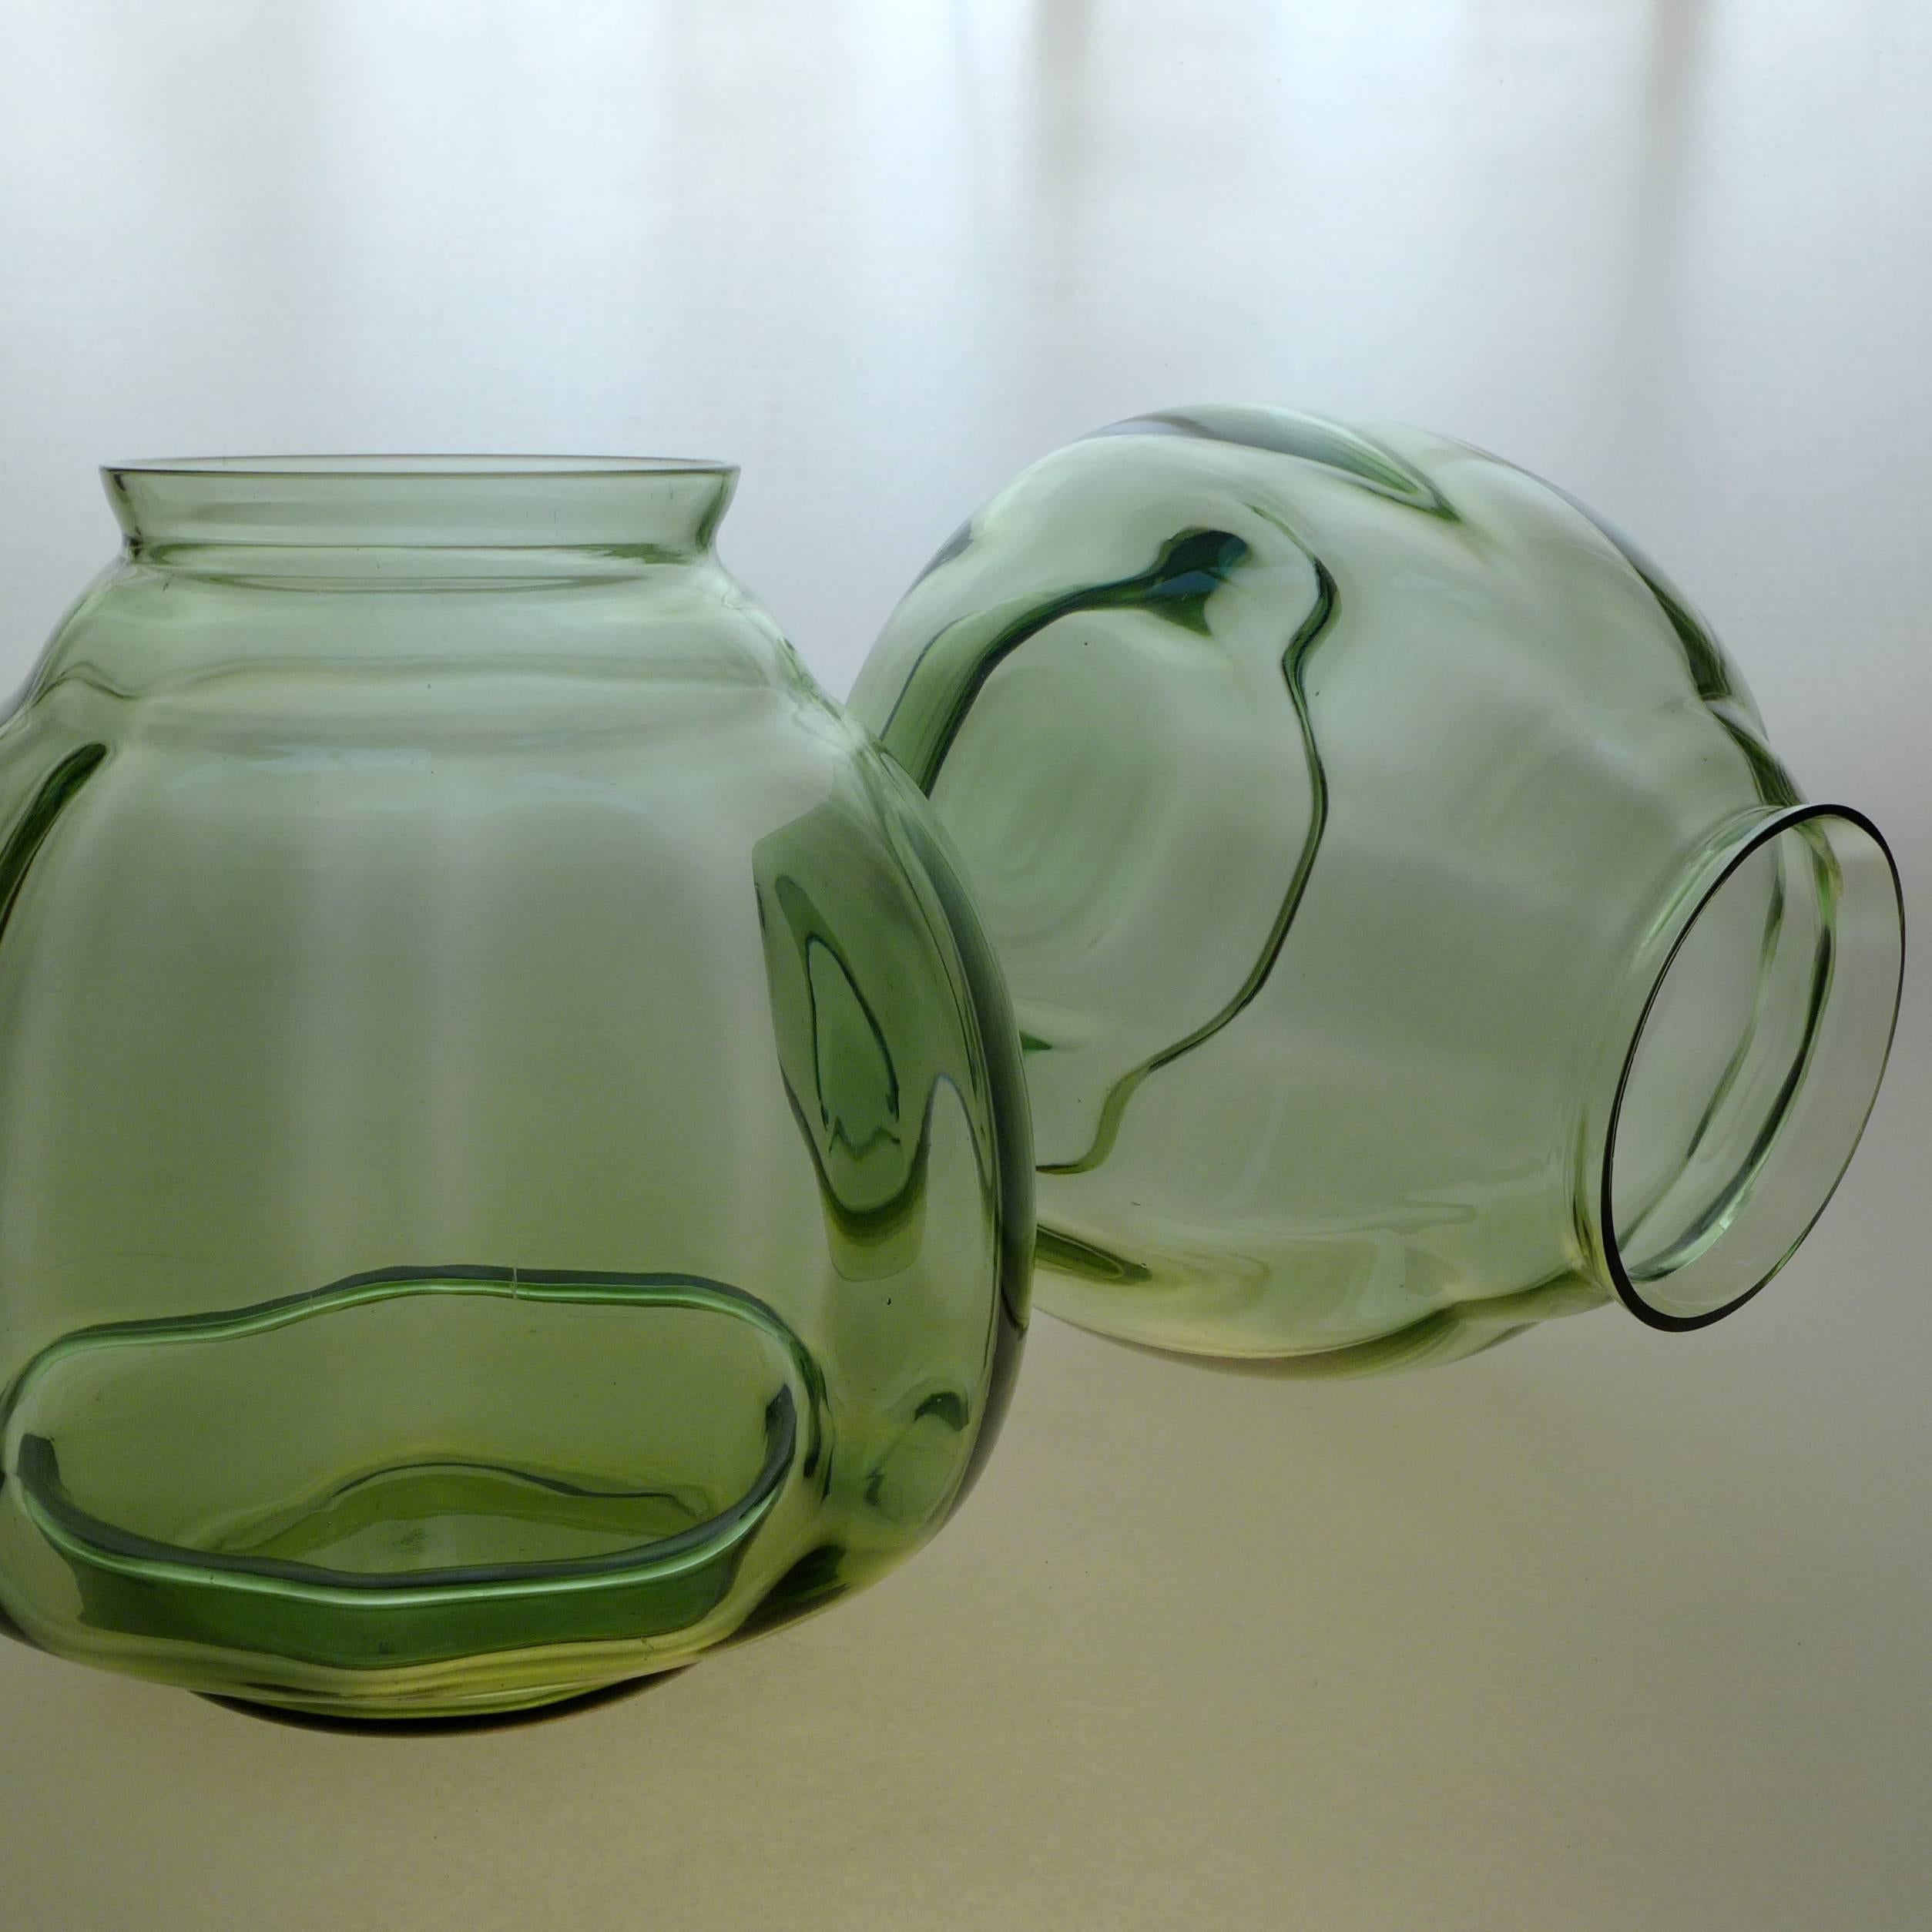 A pair of Dutch Art Deco Flora vases designed by A. D. Copier.

Andries Dirk Copier is one of the most revered glass designers of his time — a leader in the Art Deco ‘Amsterdam School’ style. Leerdam Glass is known for clean, simple, organic forms